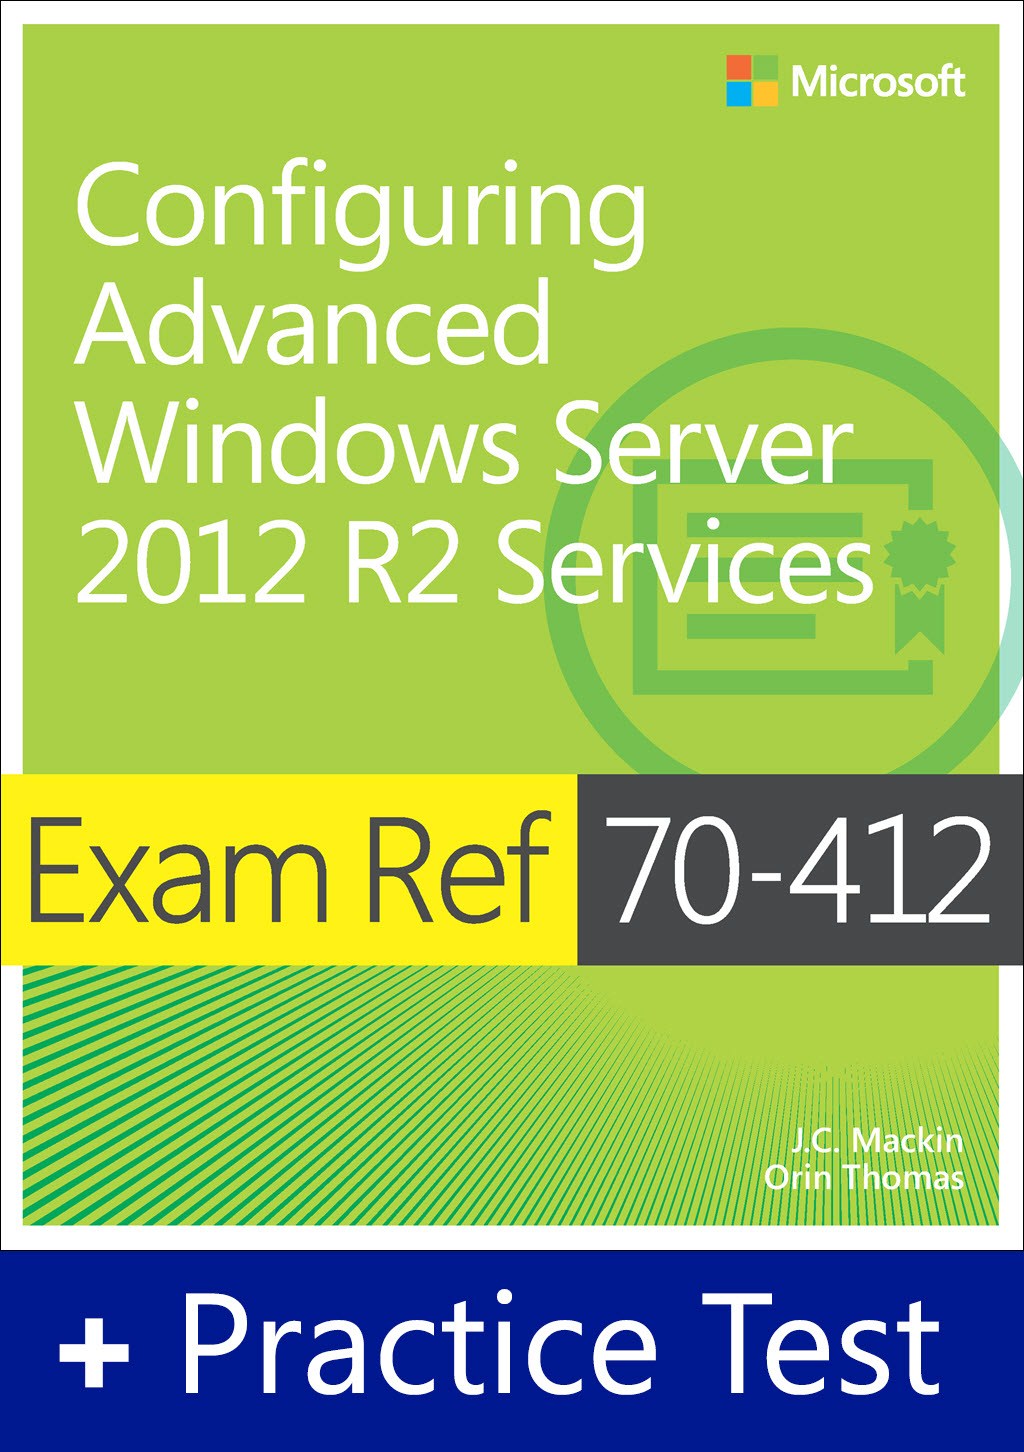 Exam Ref 70-412 Configuring Advanced Windows Server 2012 R2 Services with Practice Test